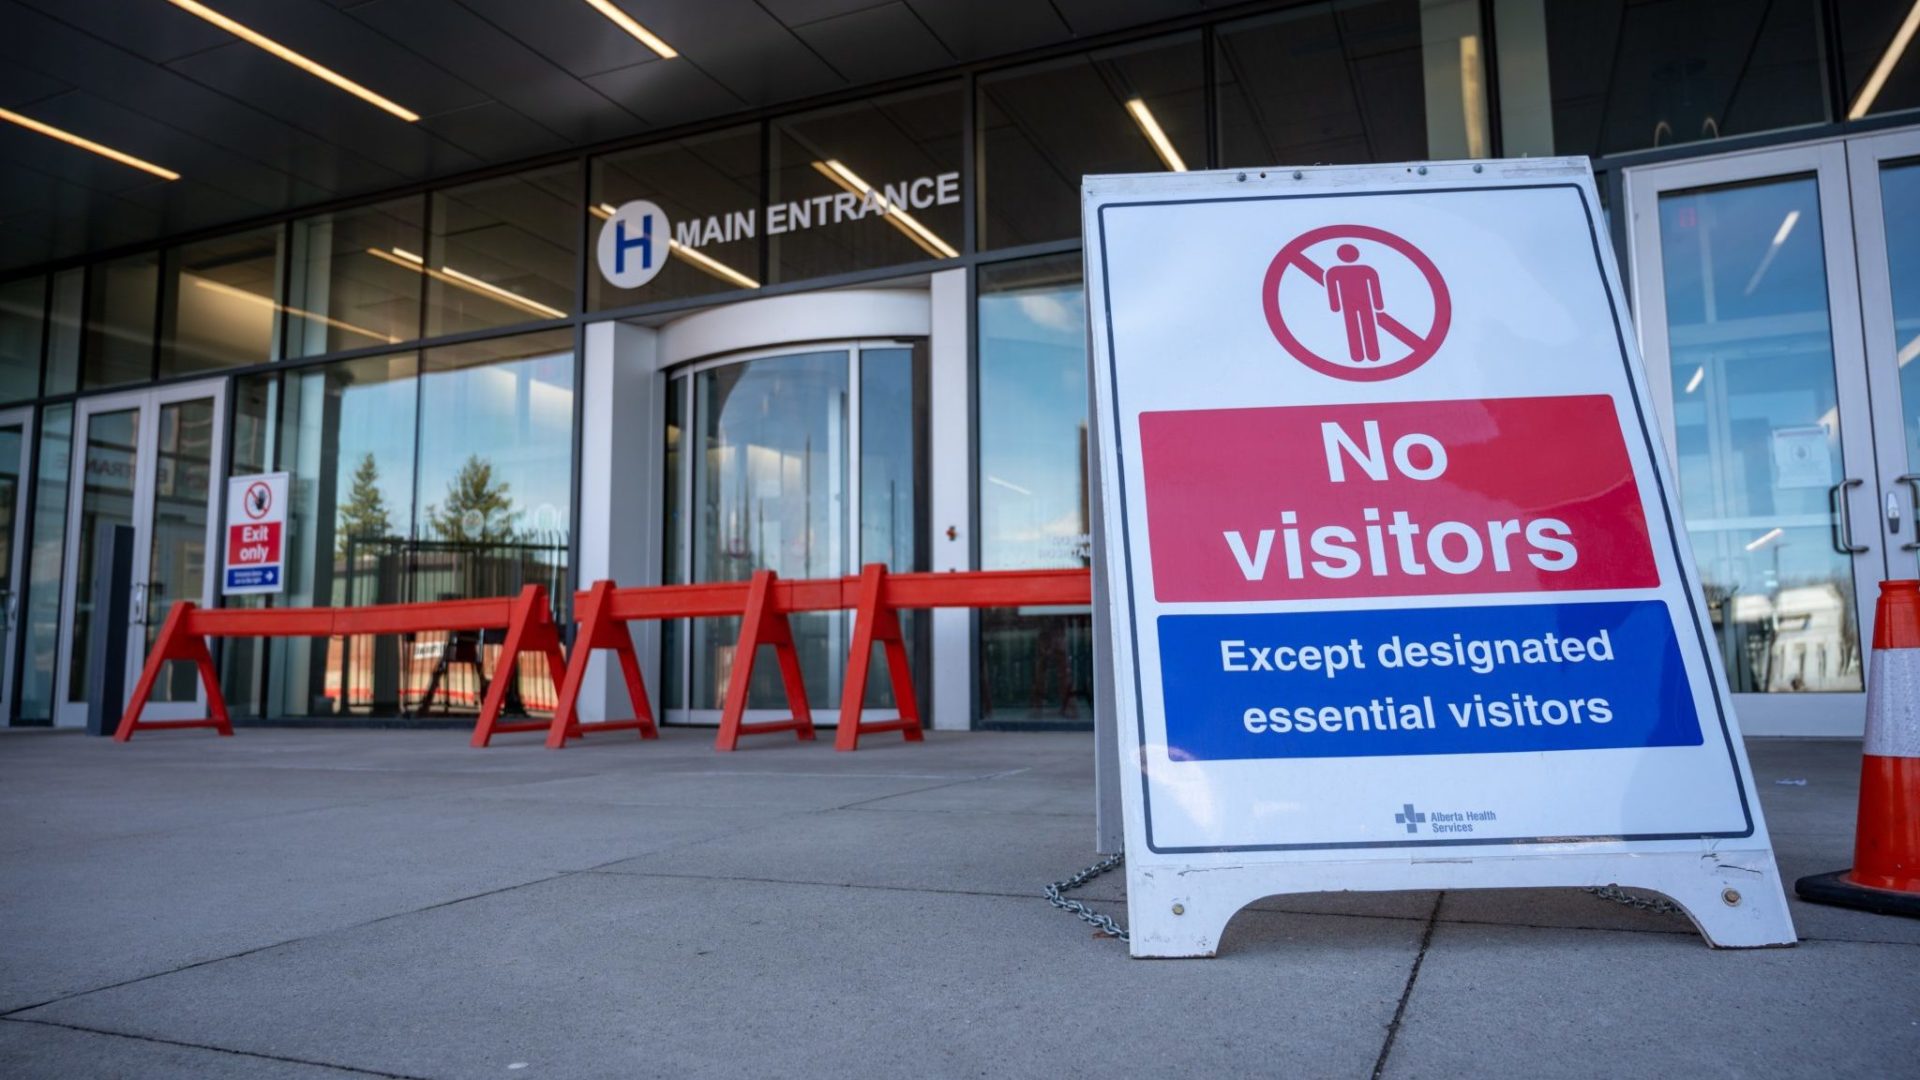 No visitors allowed signage due to COVID-19 at Chinook Regional Hospital in Lethbridge, Alberta